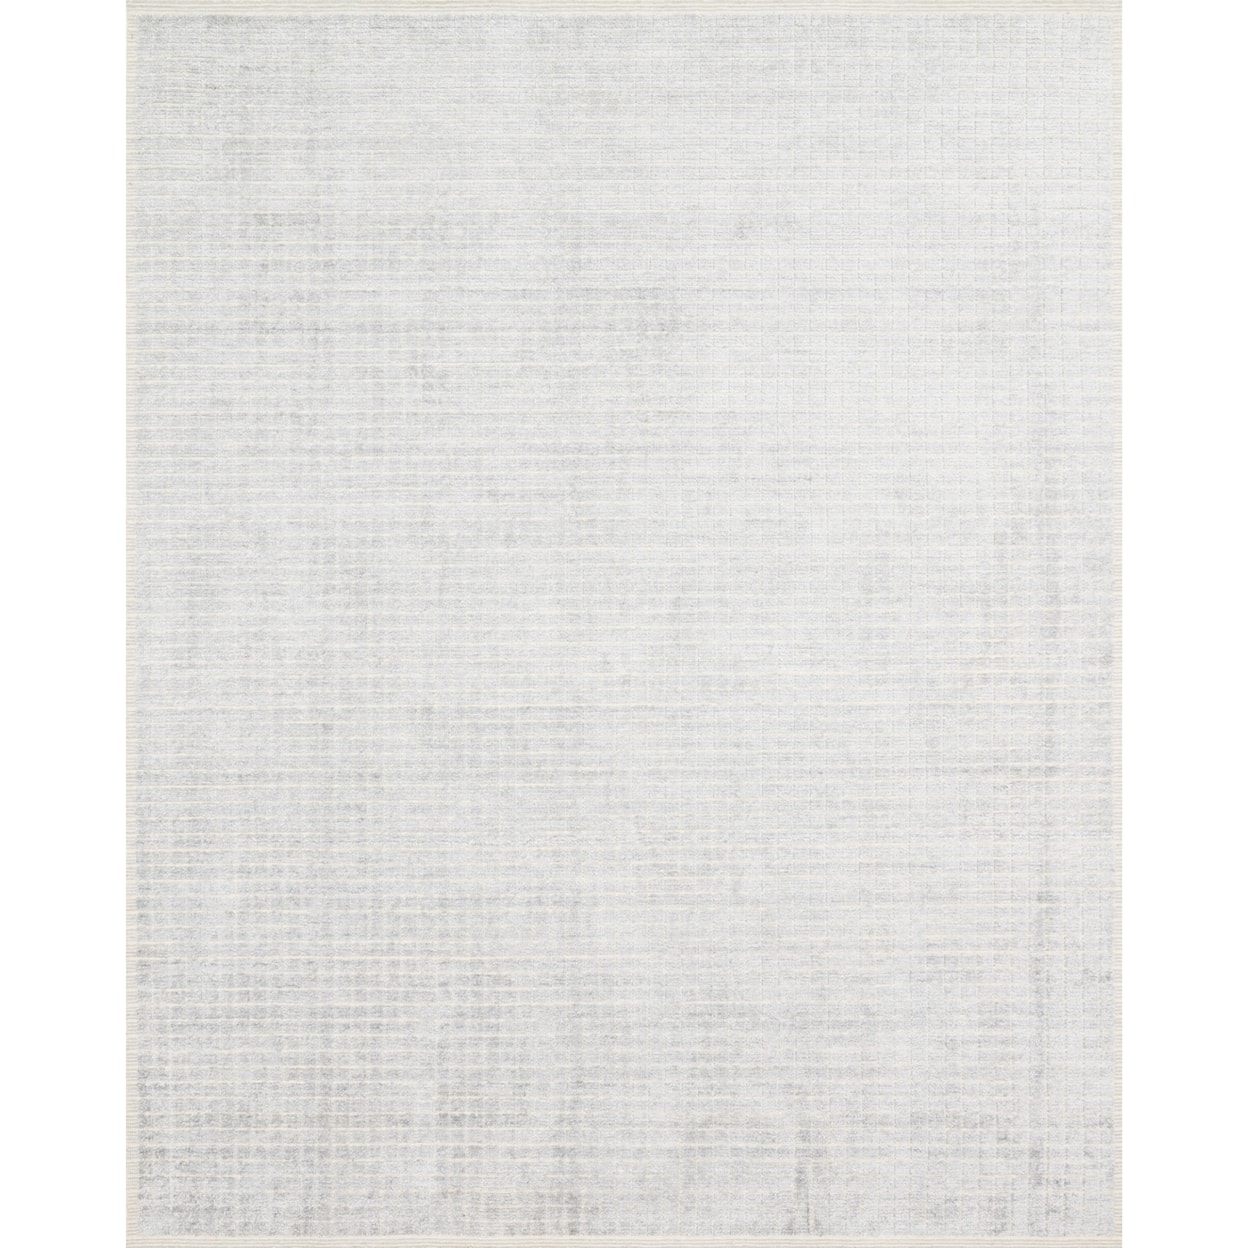 Reeds Rugs Beverly 2'6" x 8'6" Silver / Sky Rug